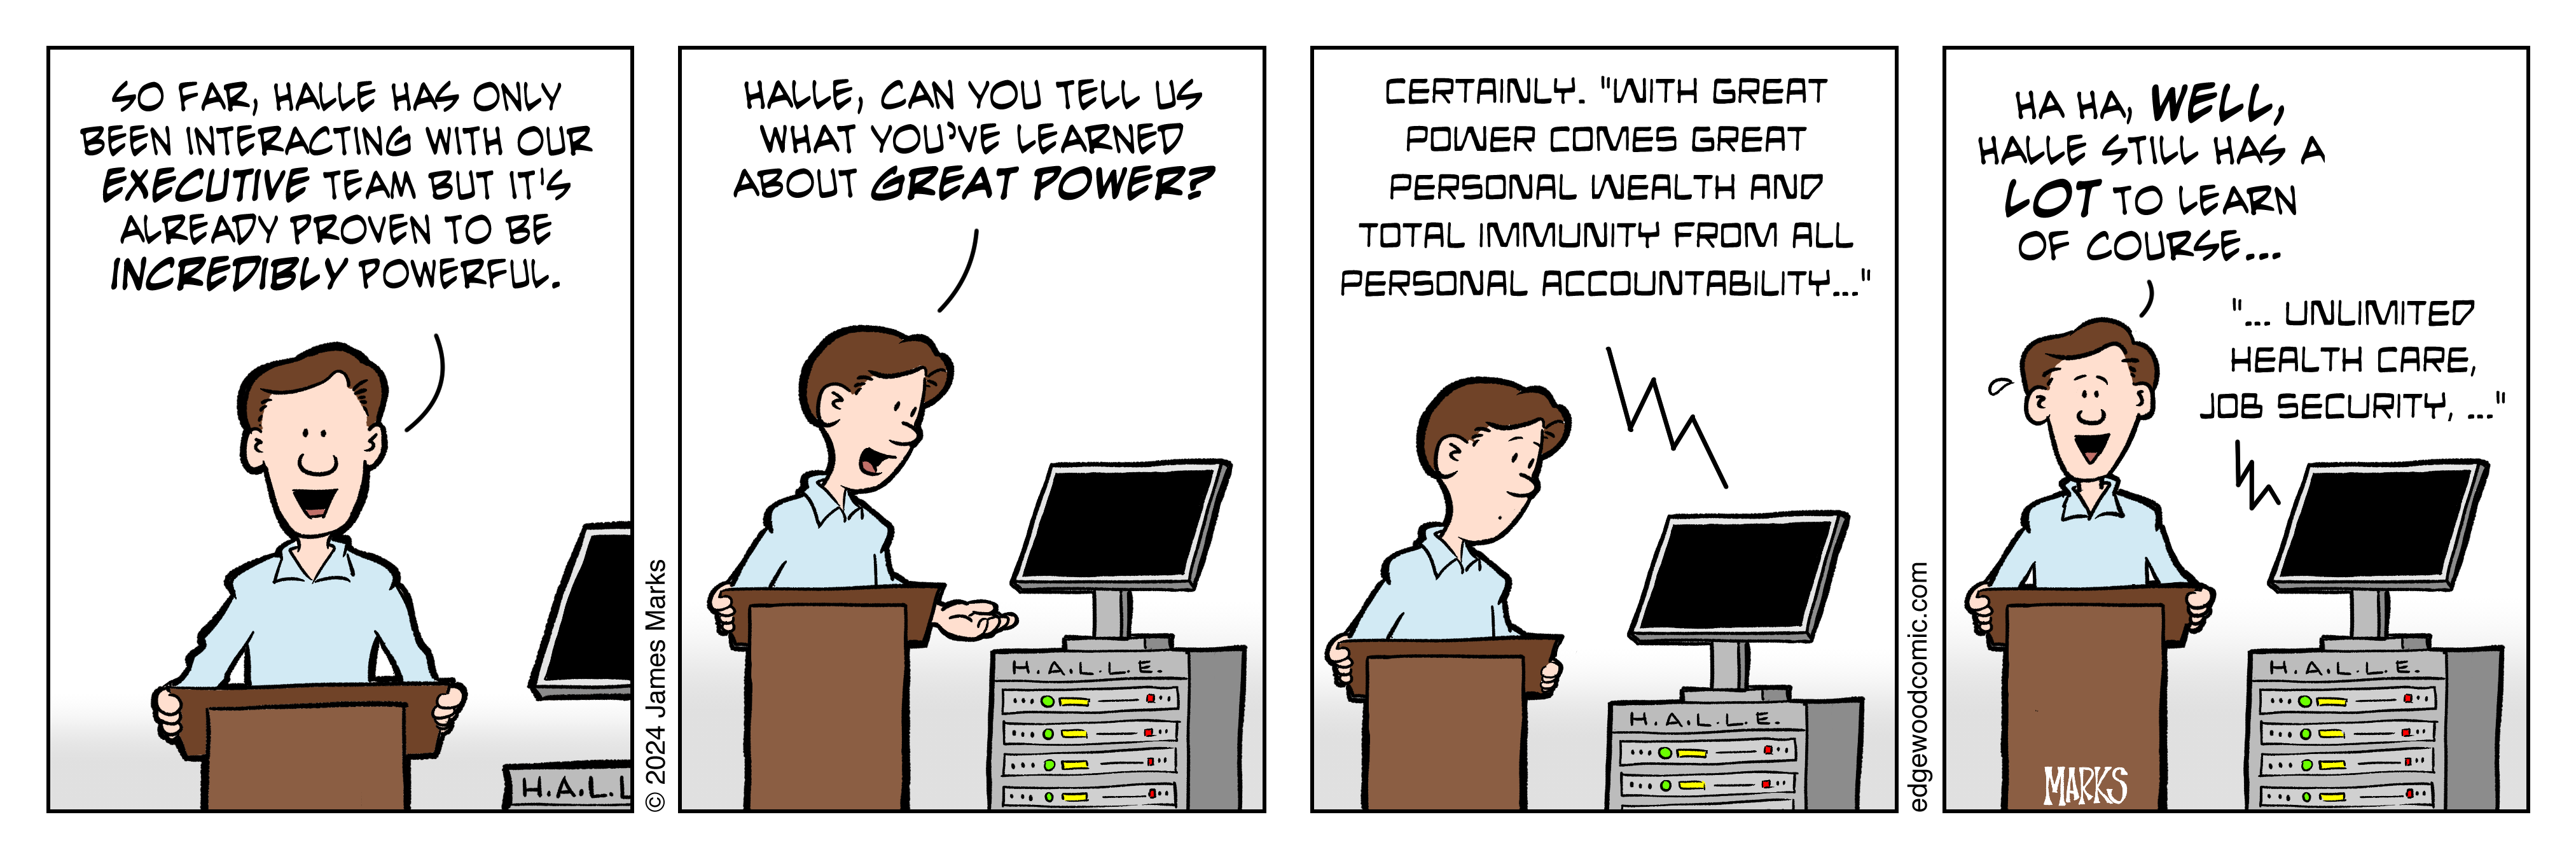 Four-panel comic with AI talking about the benefits of great power